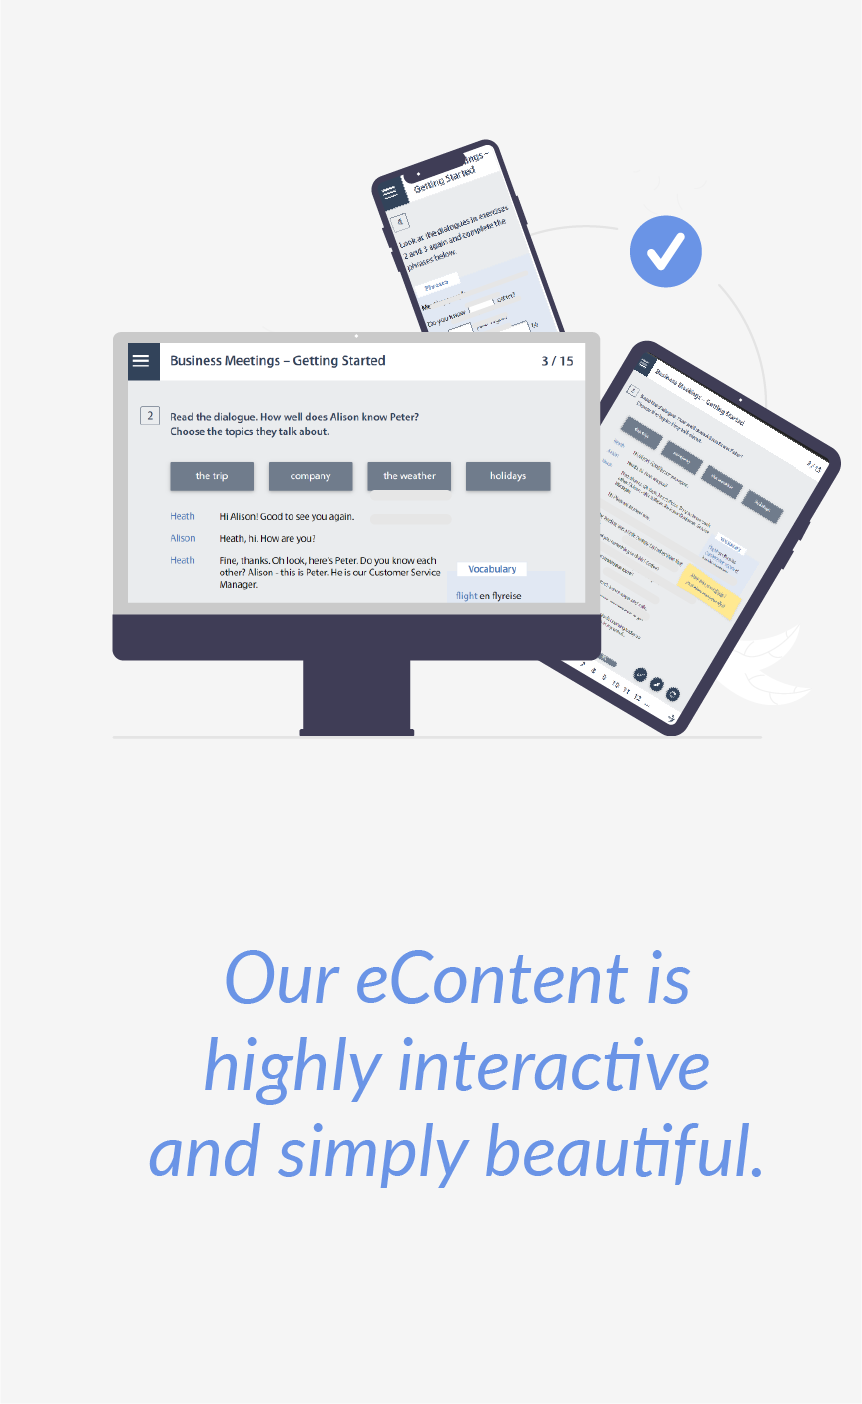 eContent packages created by our Team